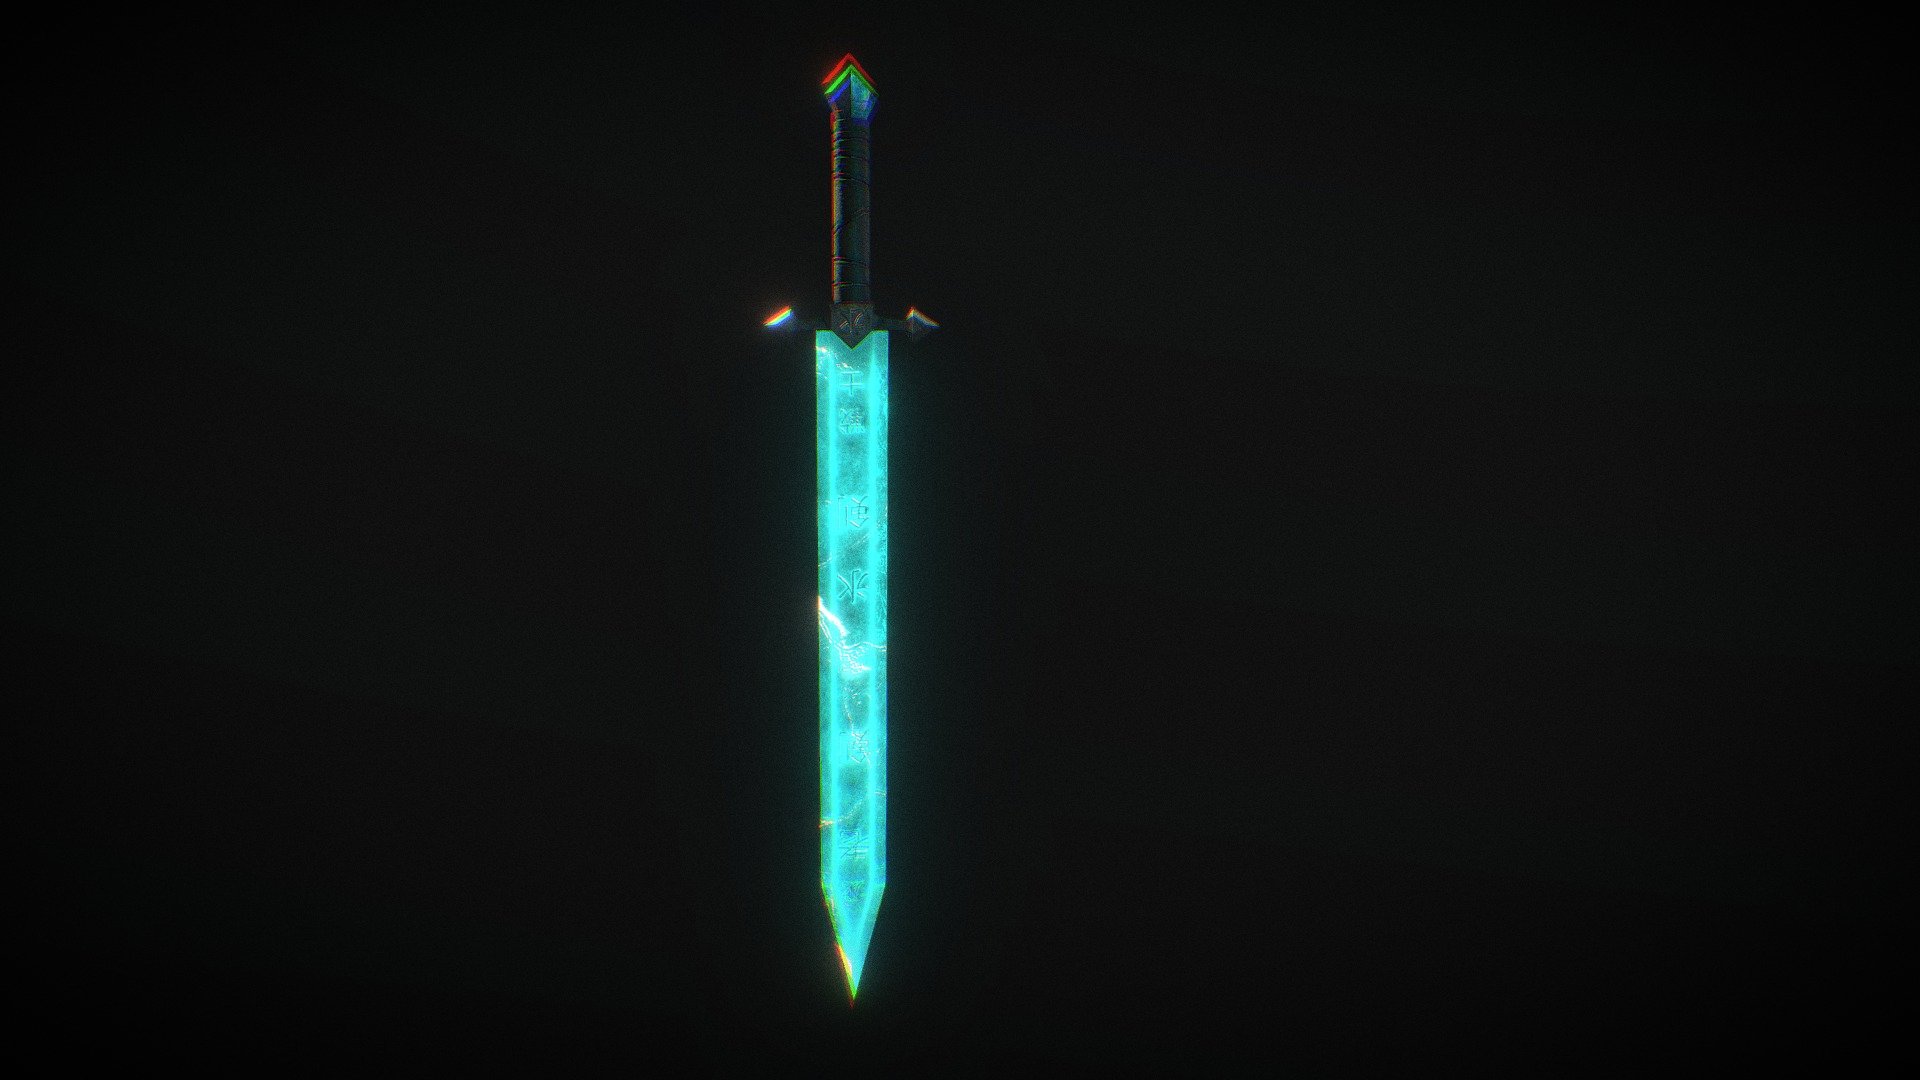 Game ready low poly Ice Sword.
Do share your views on this, I would love to know them ! - Ice Sword - 3D model by Aminur Rahman (@Aminurrahman) 3d model